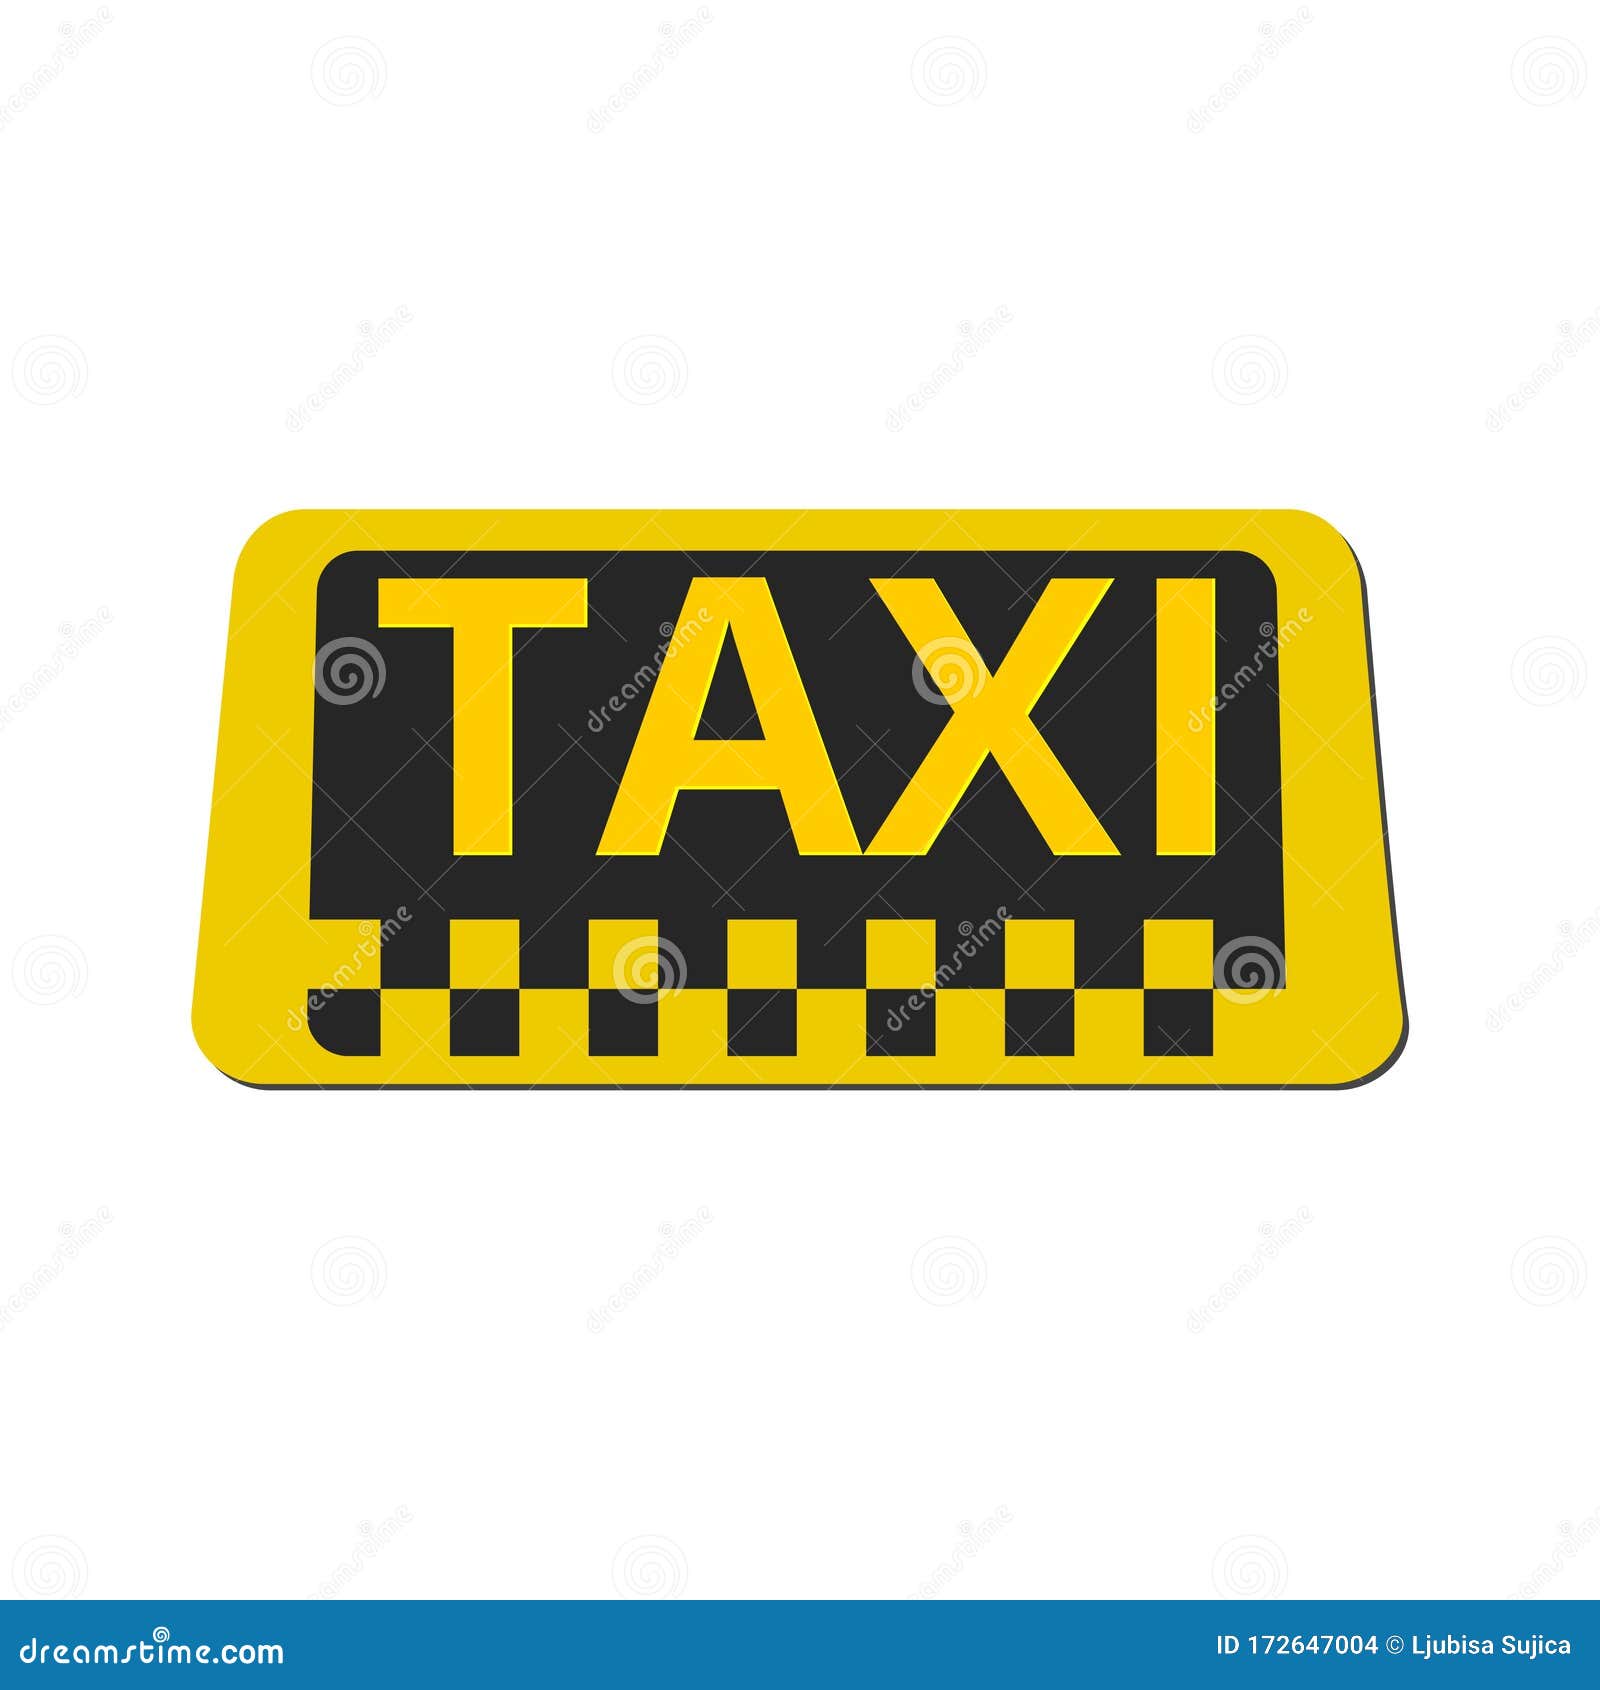  Taxi Lux  thumbnail